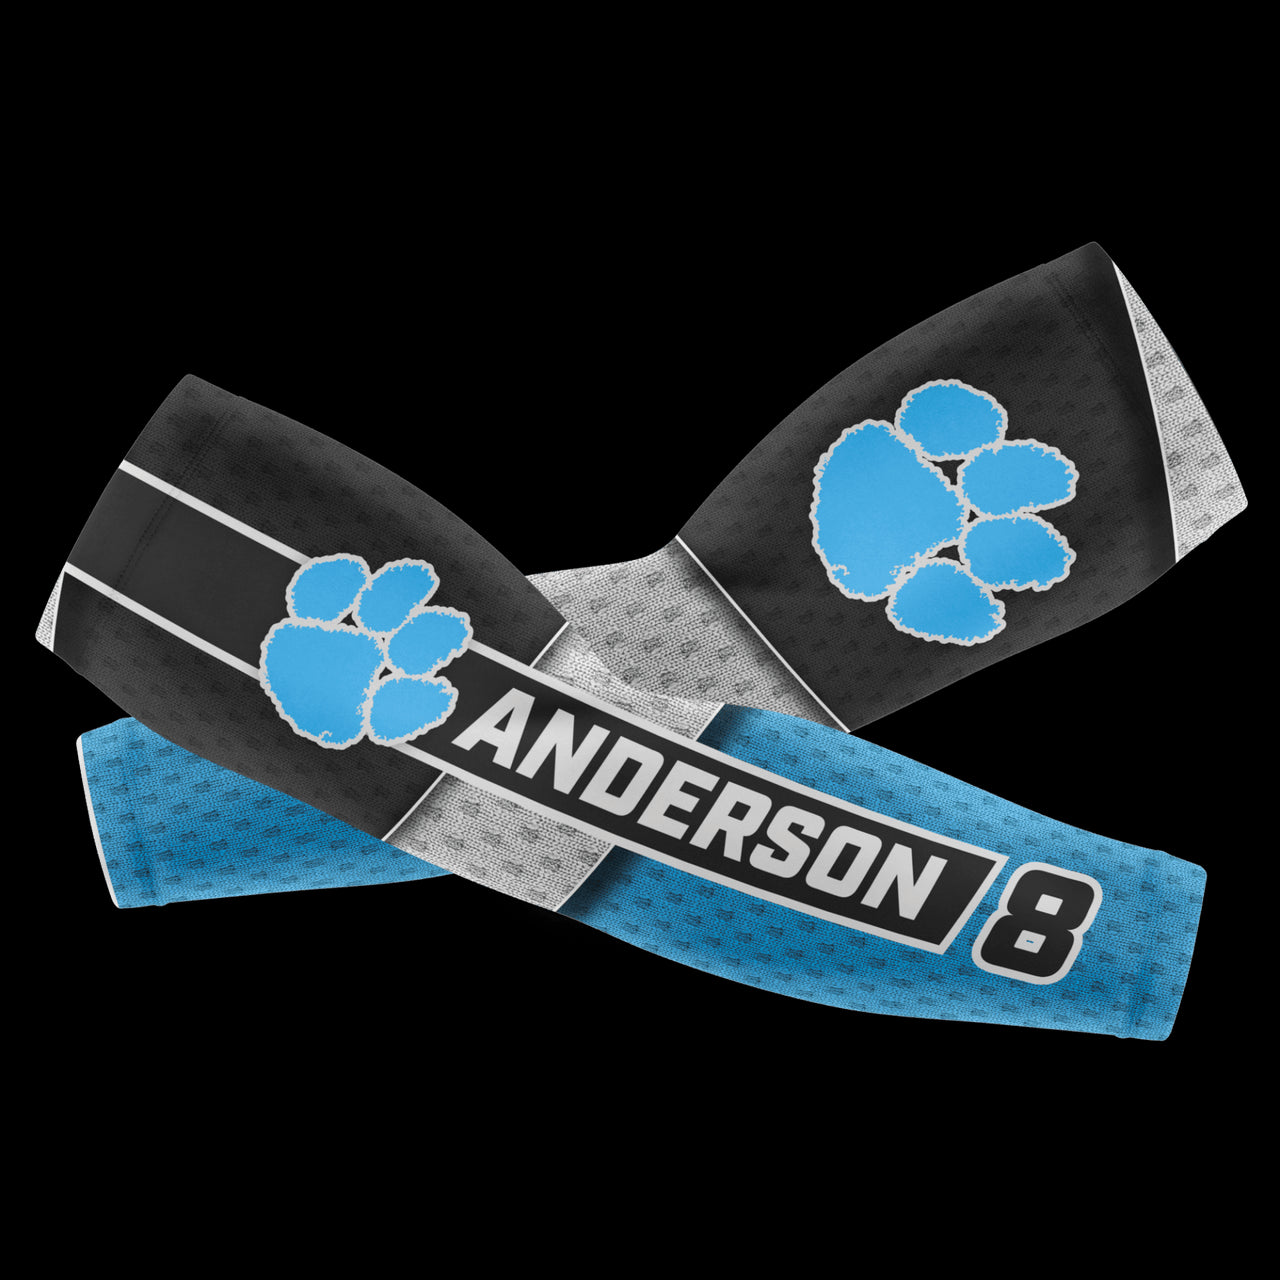 Youth Football Arm Sleeves